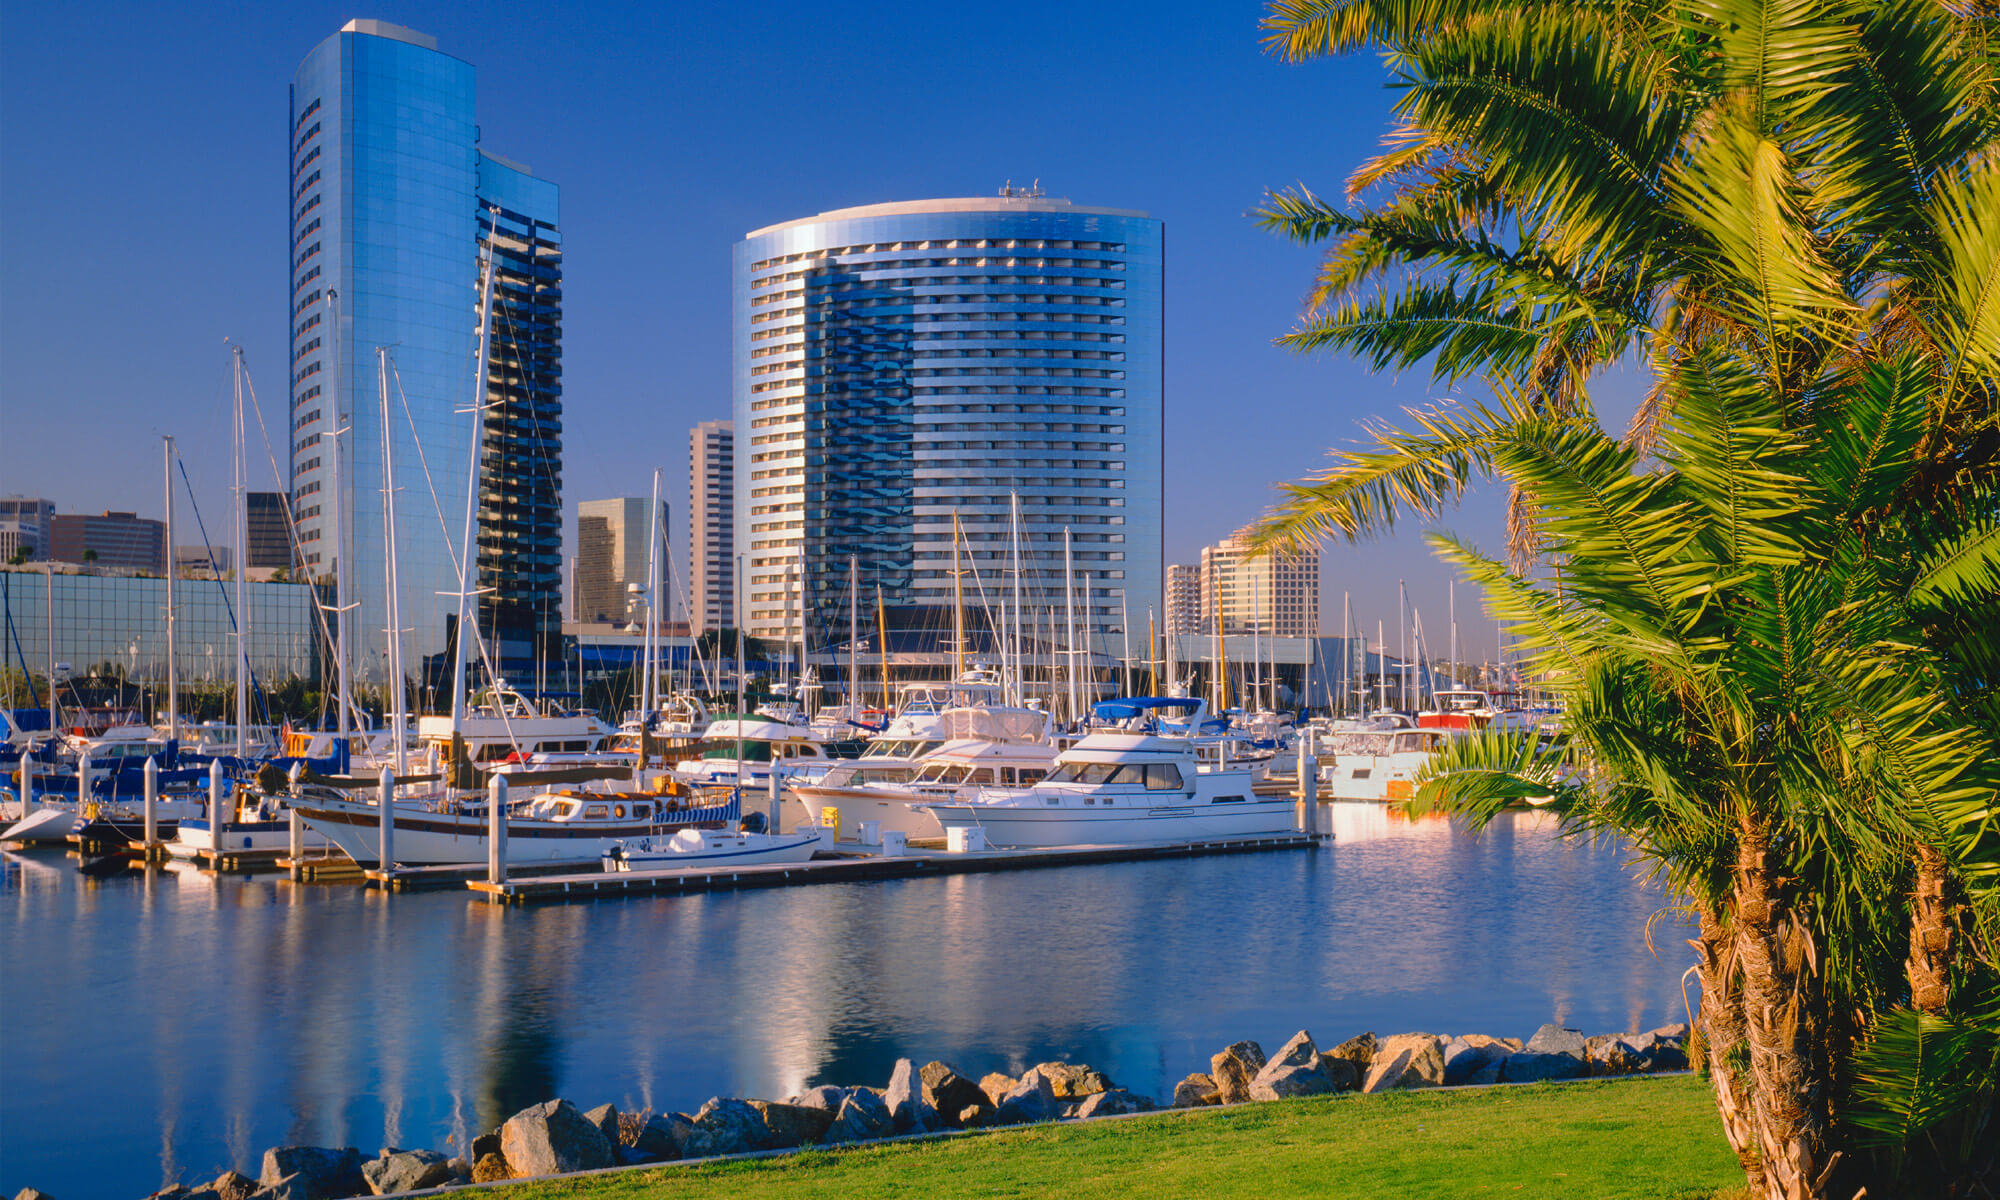 The two towers of the Marriott Marquis Hotel just overlooking a marina in San Diego, CA